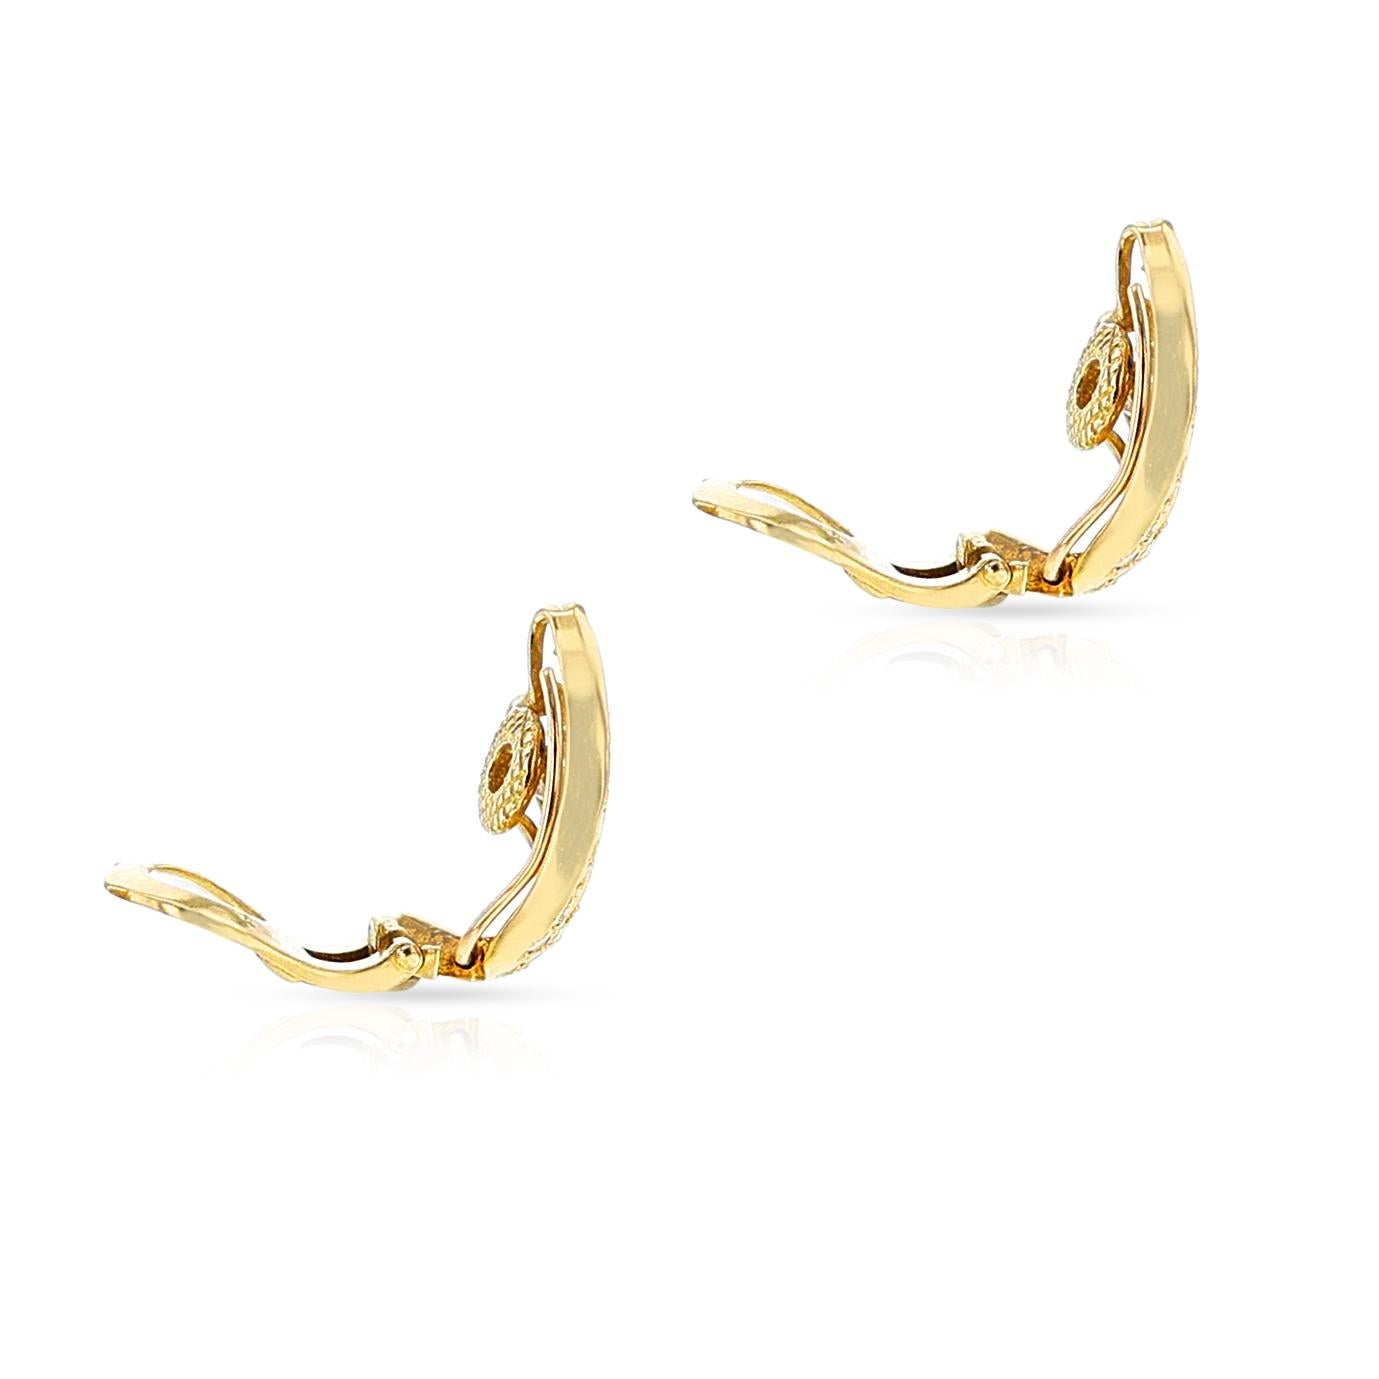 Van Cleef & Arpels Three Arch Earrings, 18k In Excellent Condition For Sale In New York, NY